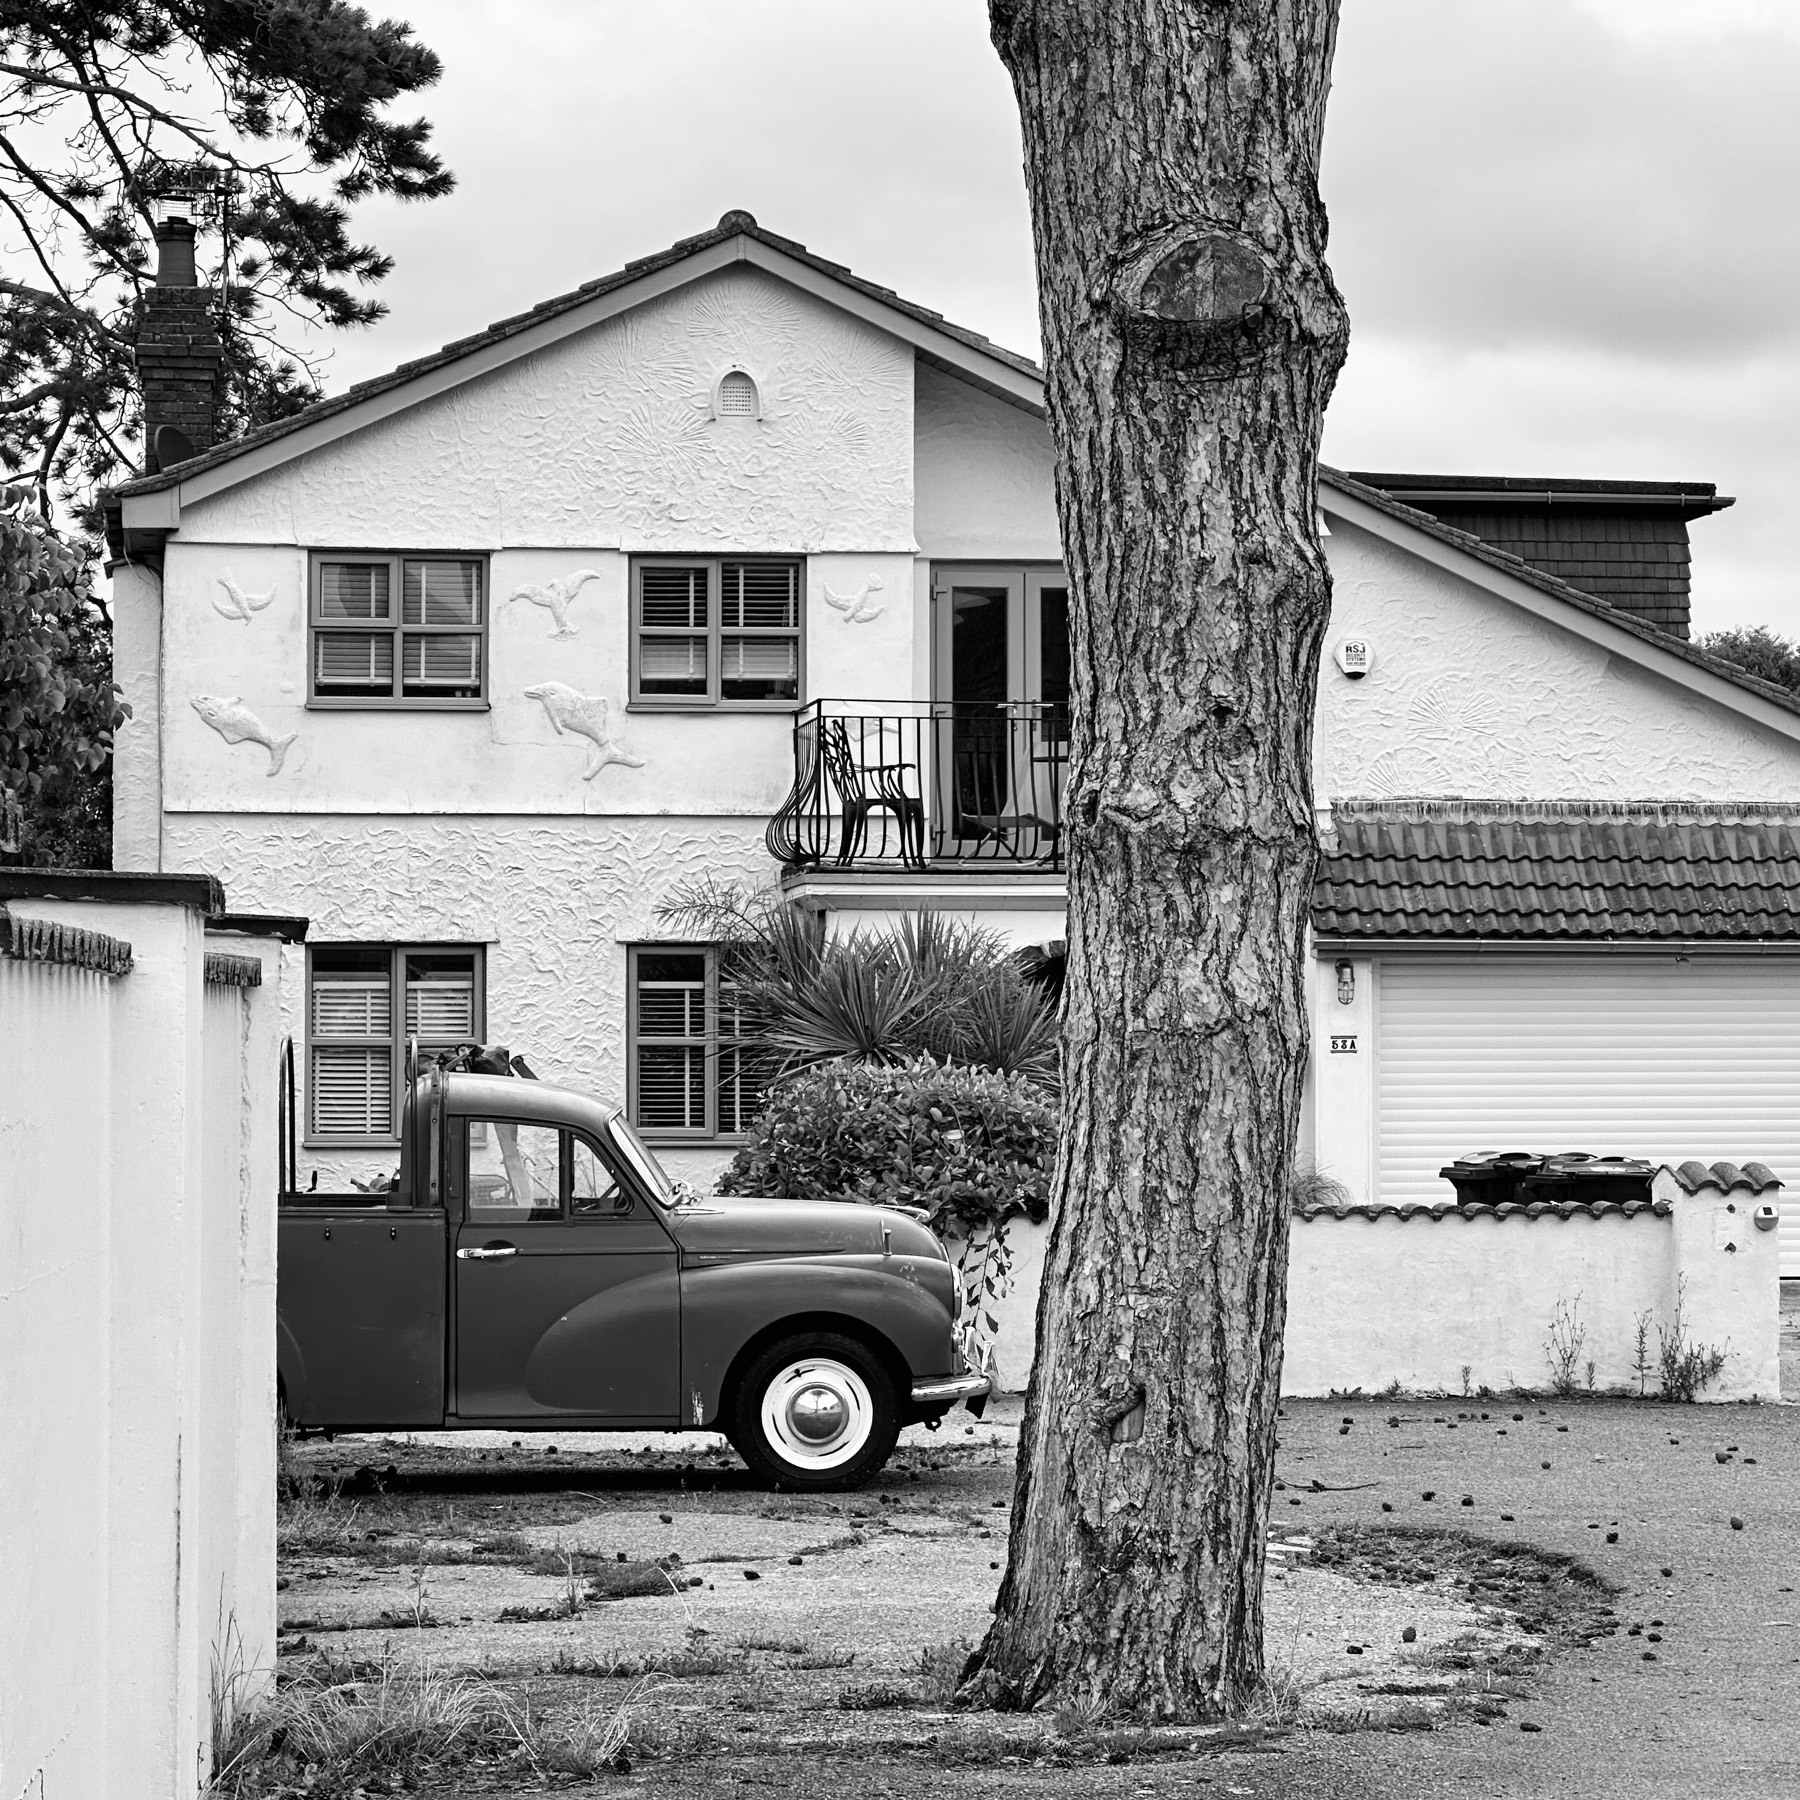 Black and white stylised photo of a house with an old truck parked outside